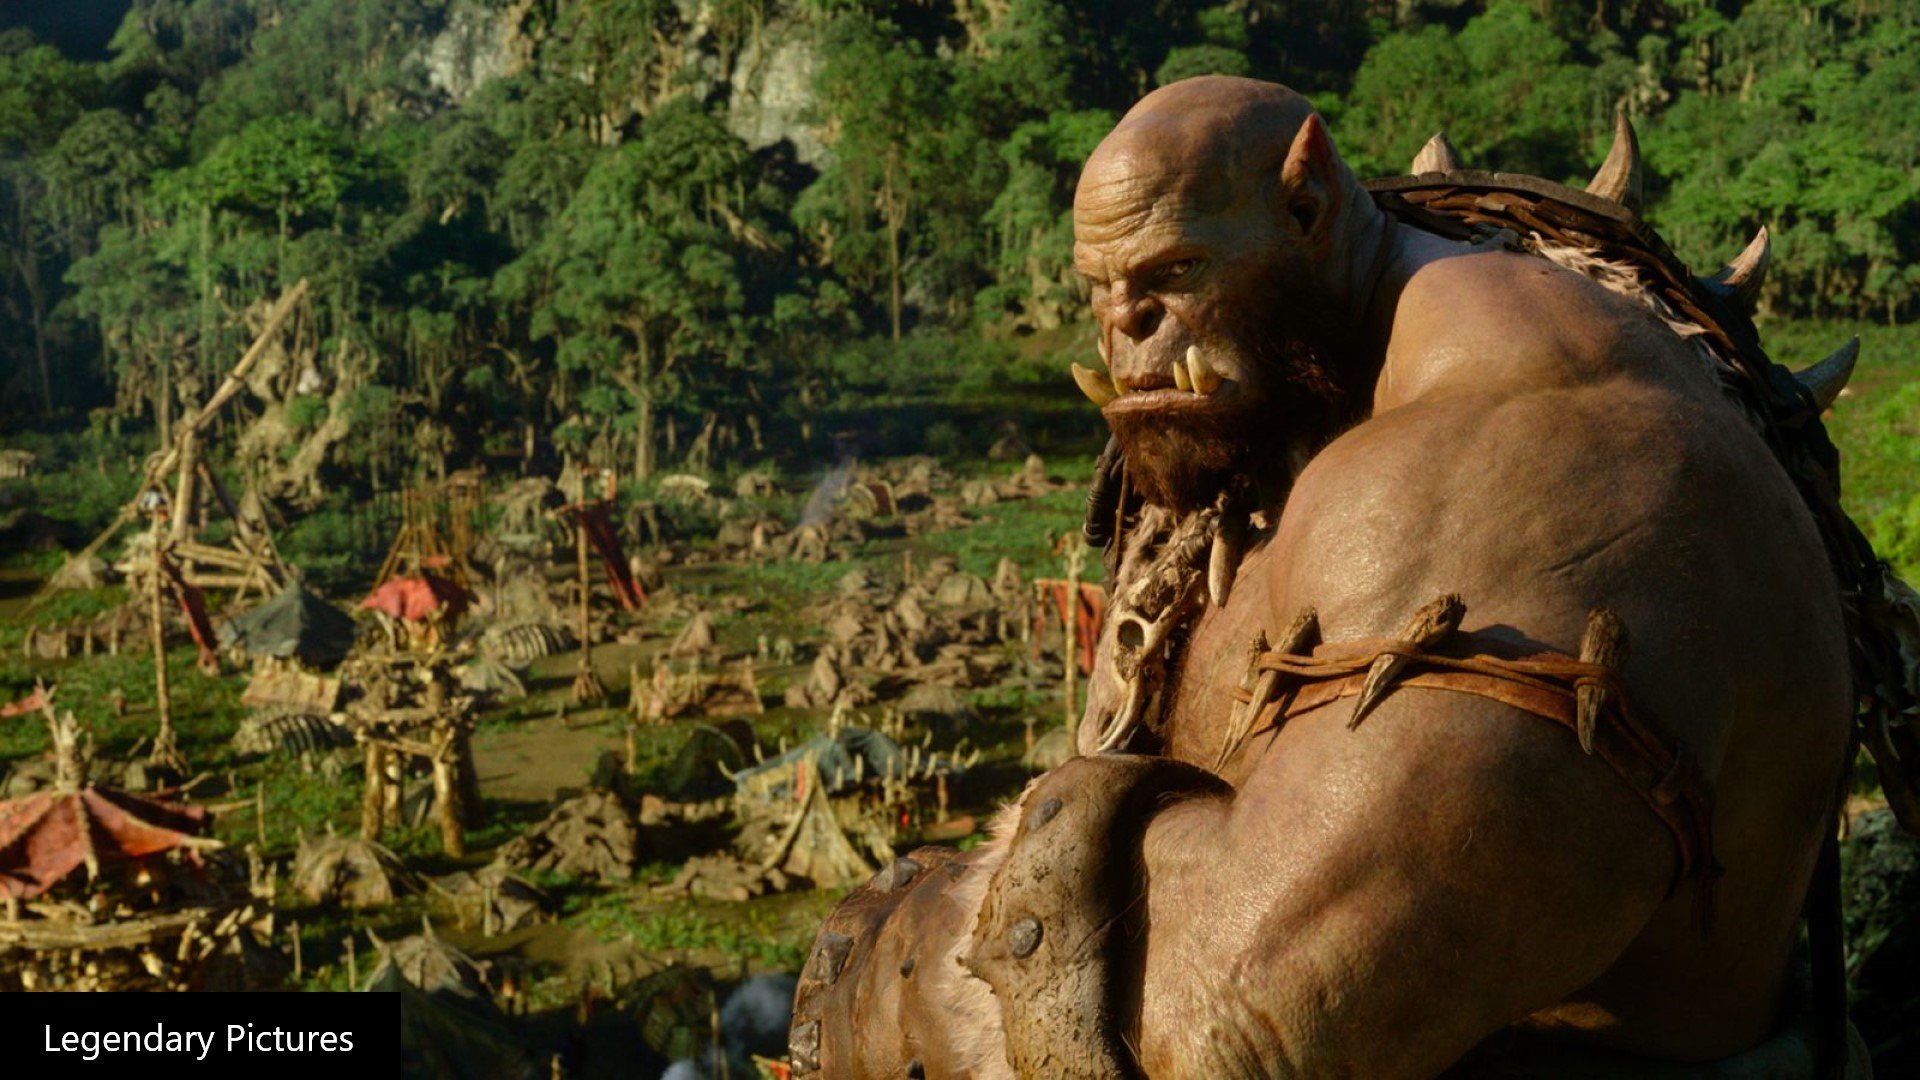 Dungeons and Dragons movies - Durotan from the Warcraft movie